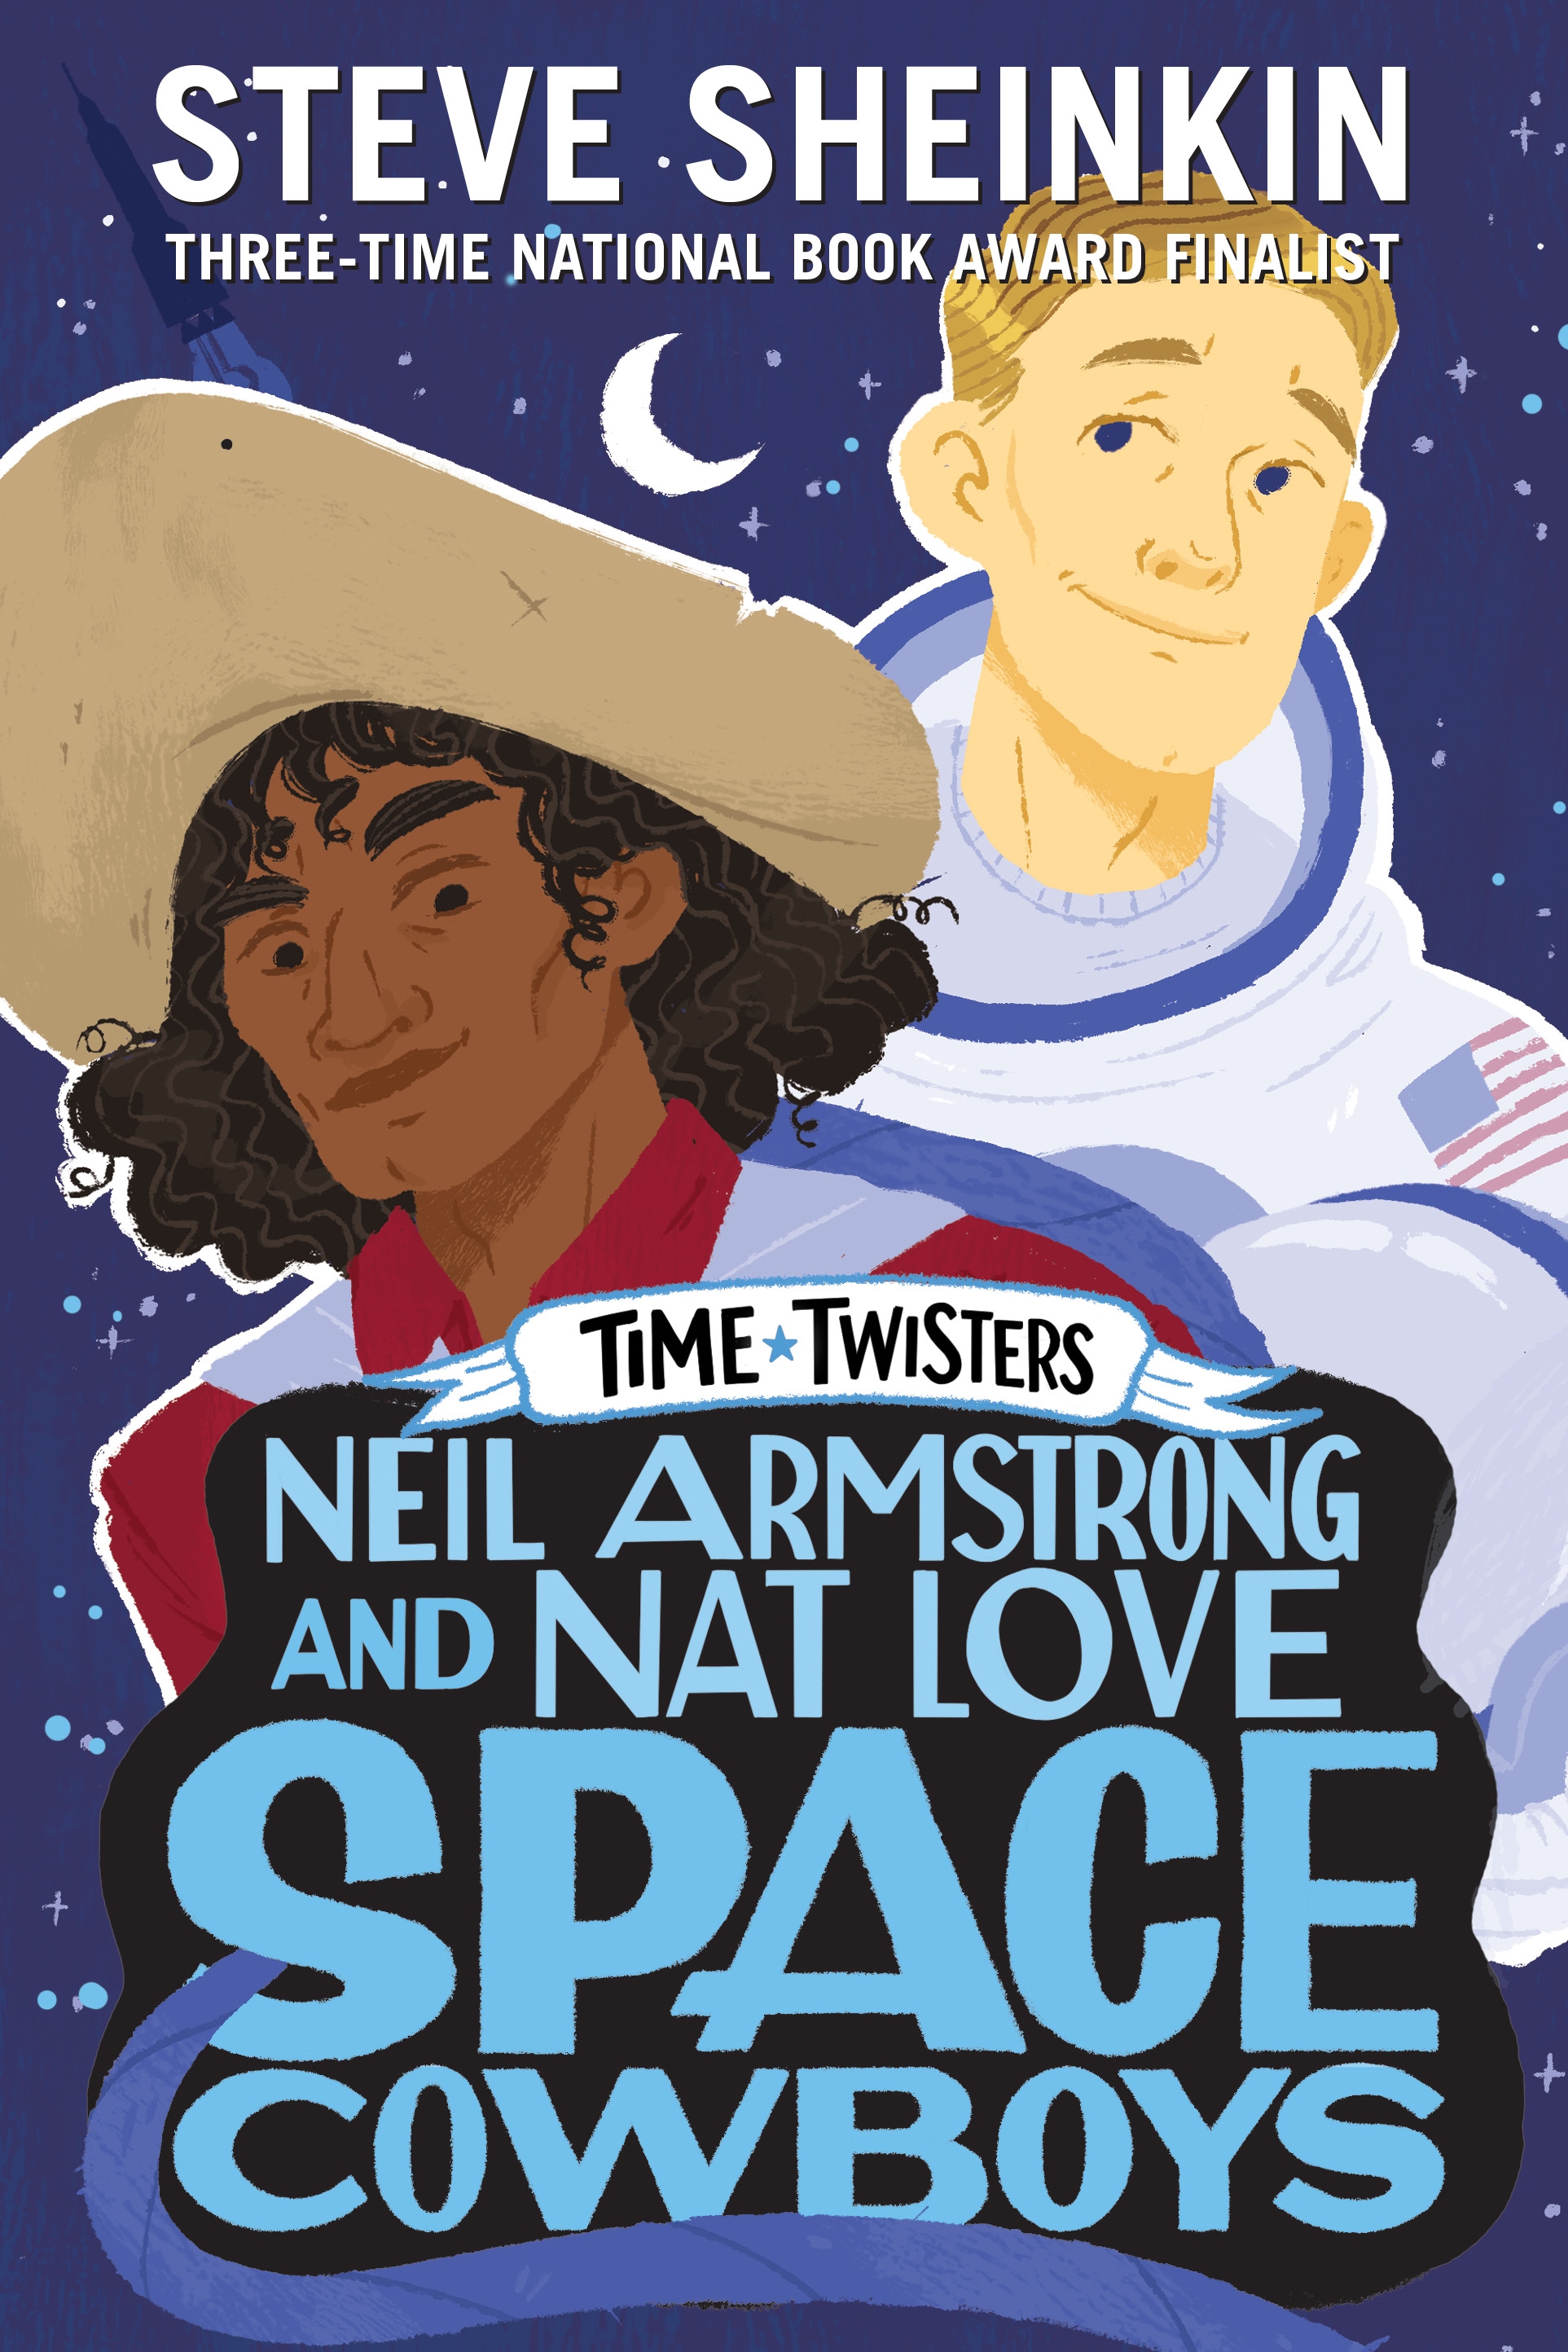 Neil Armstrong and Nat Love, Space Cowboys cover image